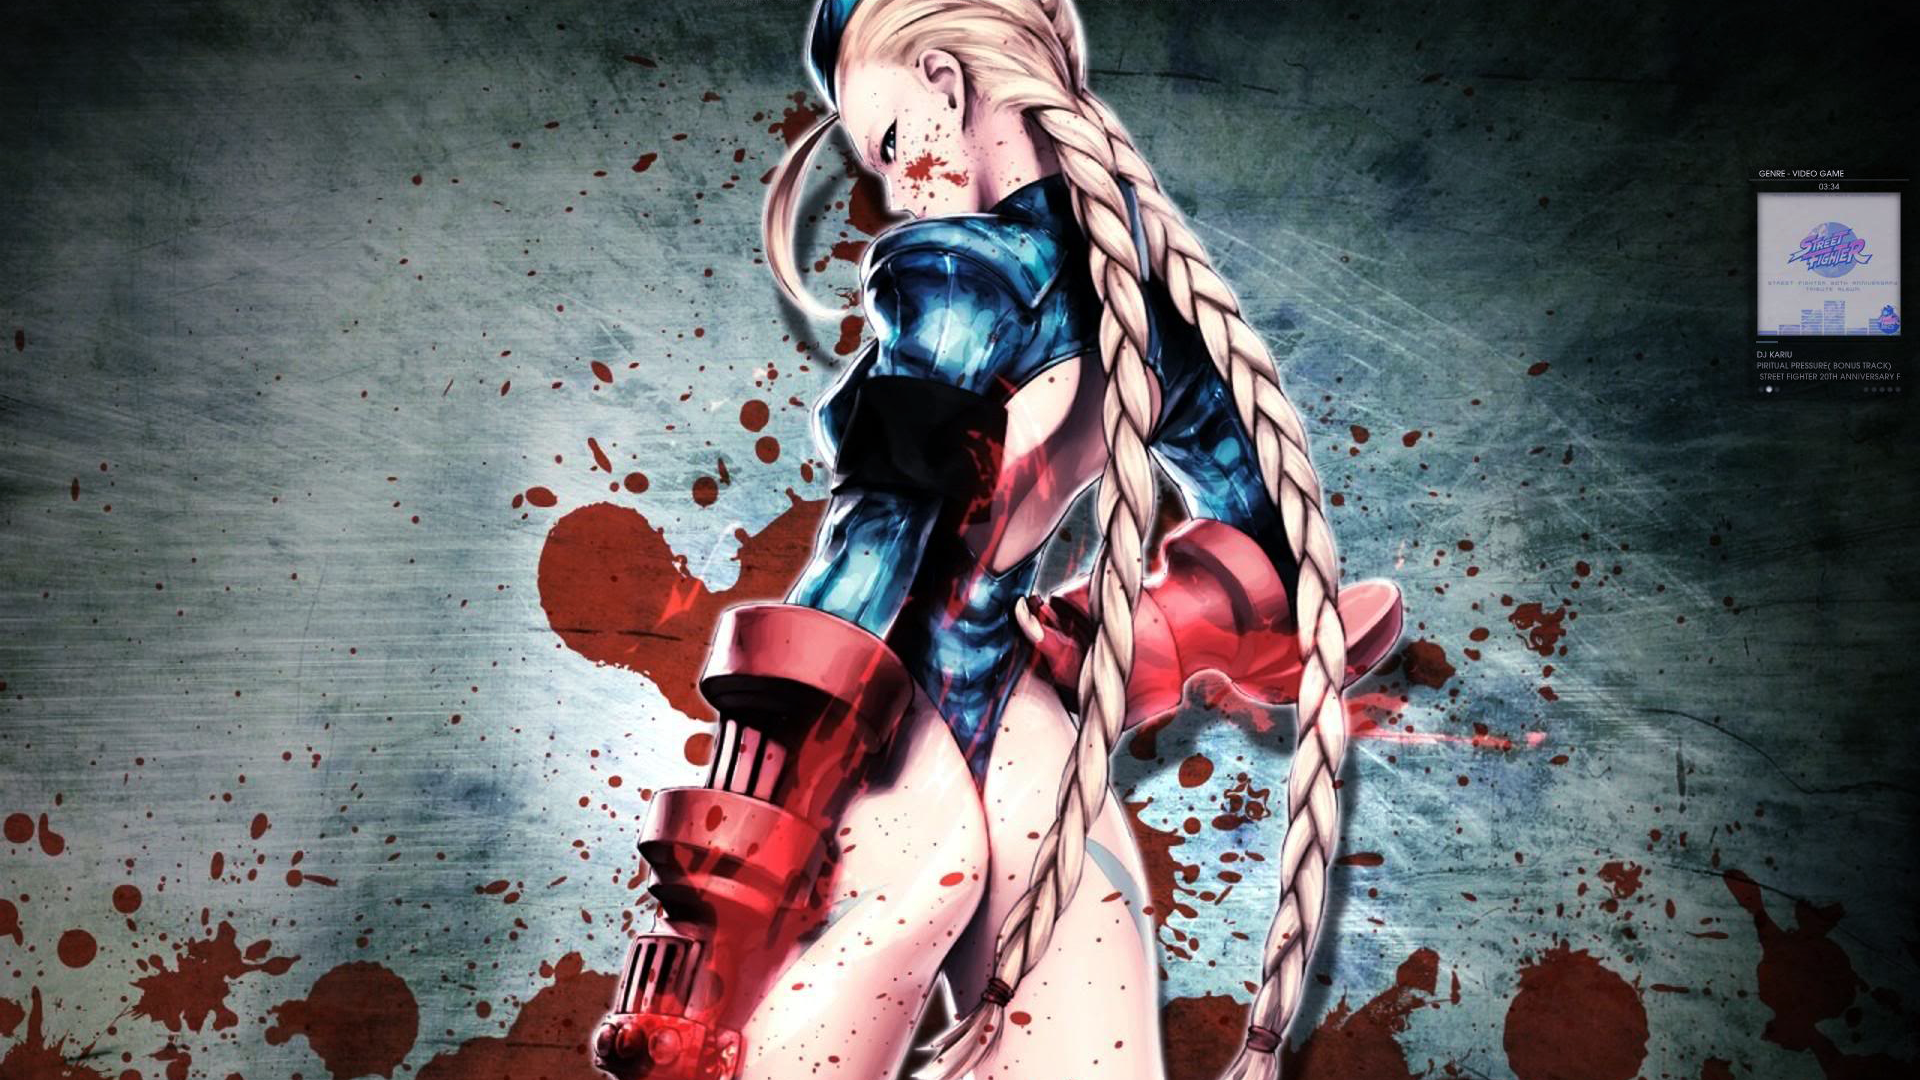 Wallpapers Cammy Street Fighter 1920x1080 #cammy